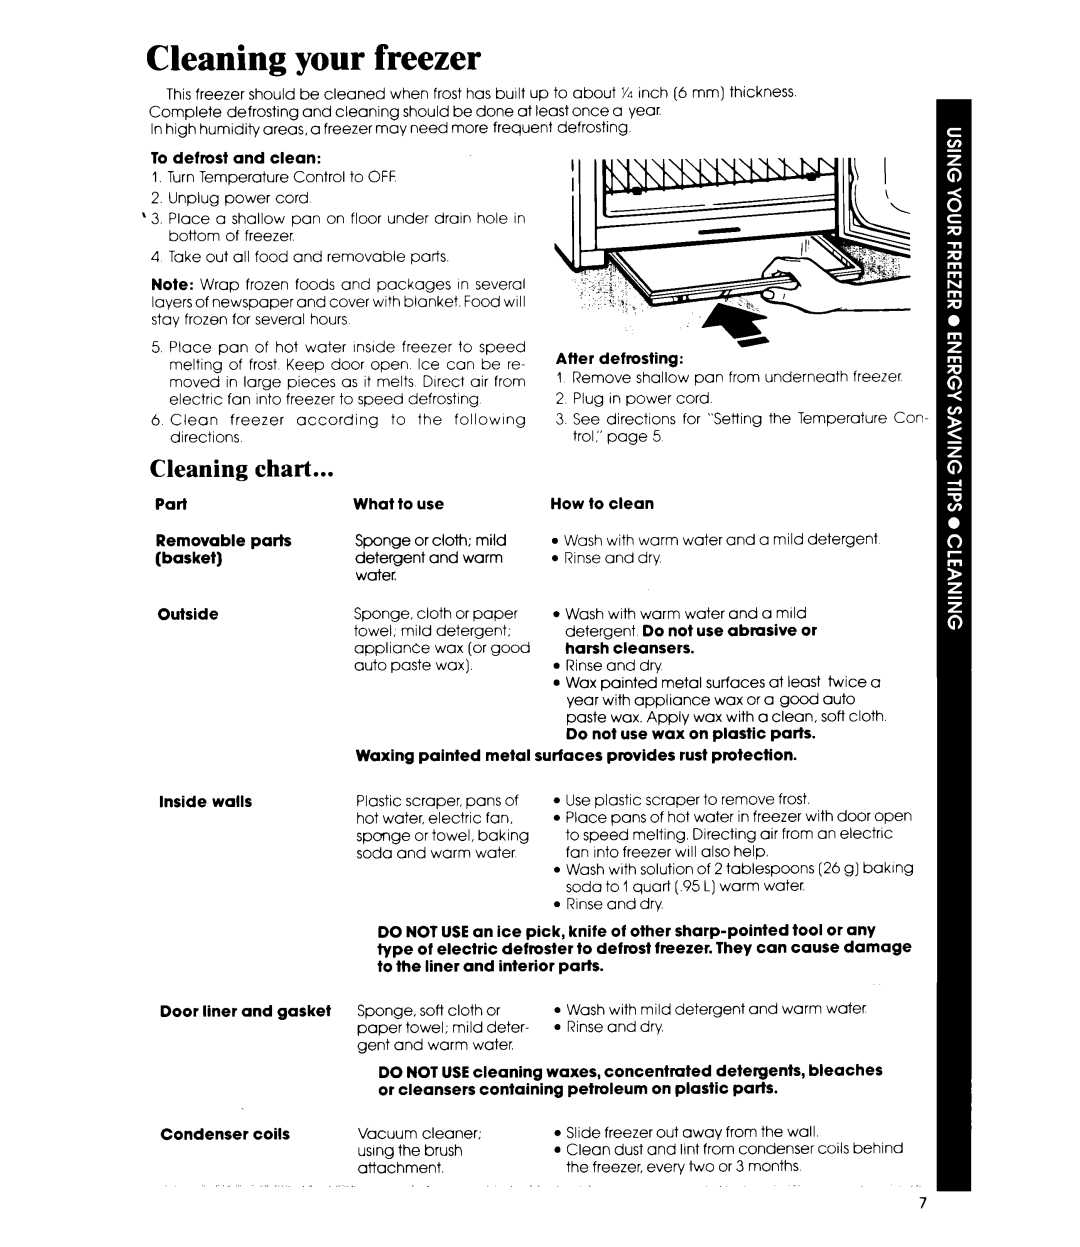 Whirlpool EV150F manual Cleaning your freezer, chart 